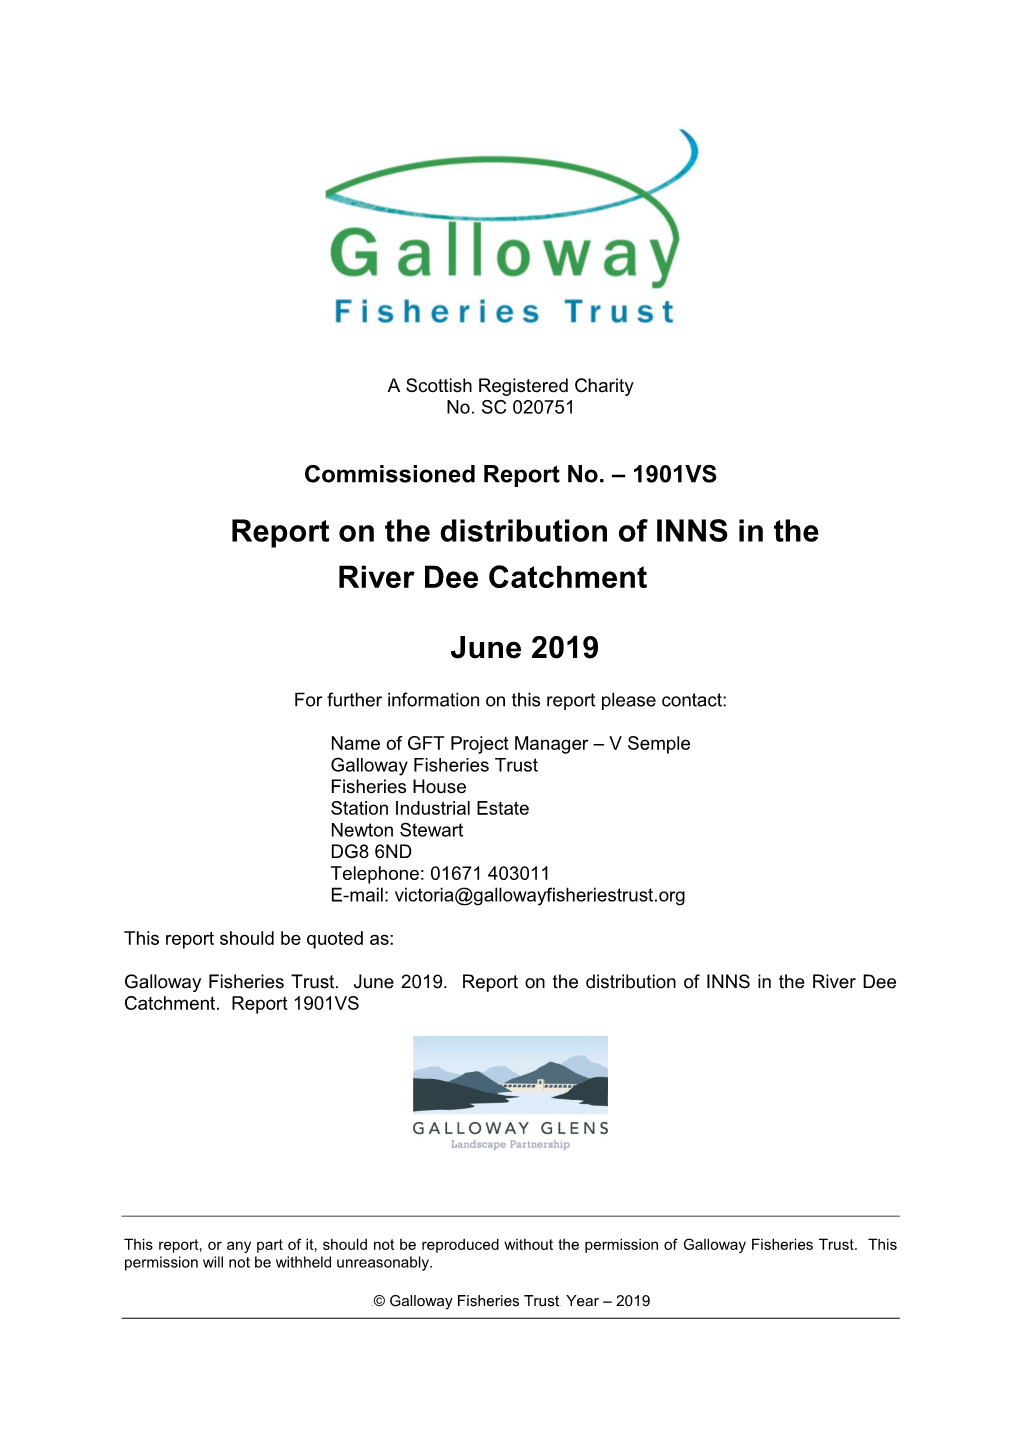 Report on the Distribution of INNS in the River Dee Catchment